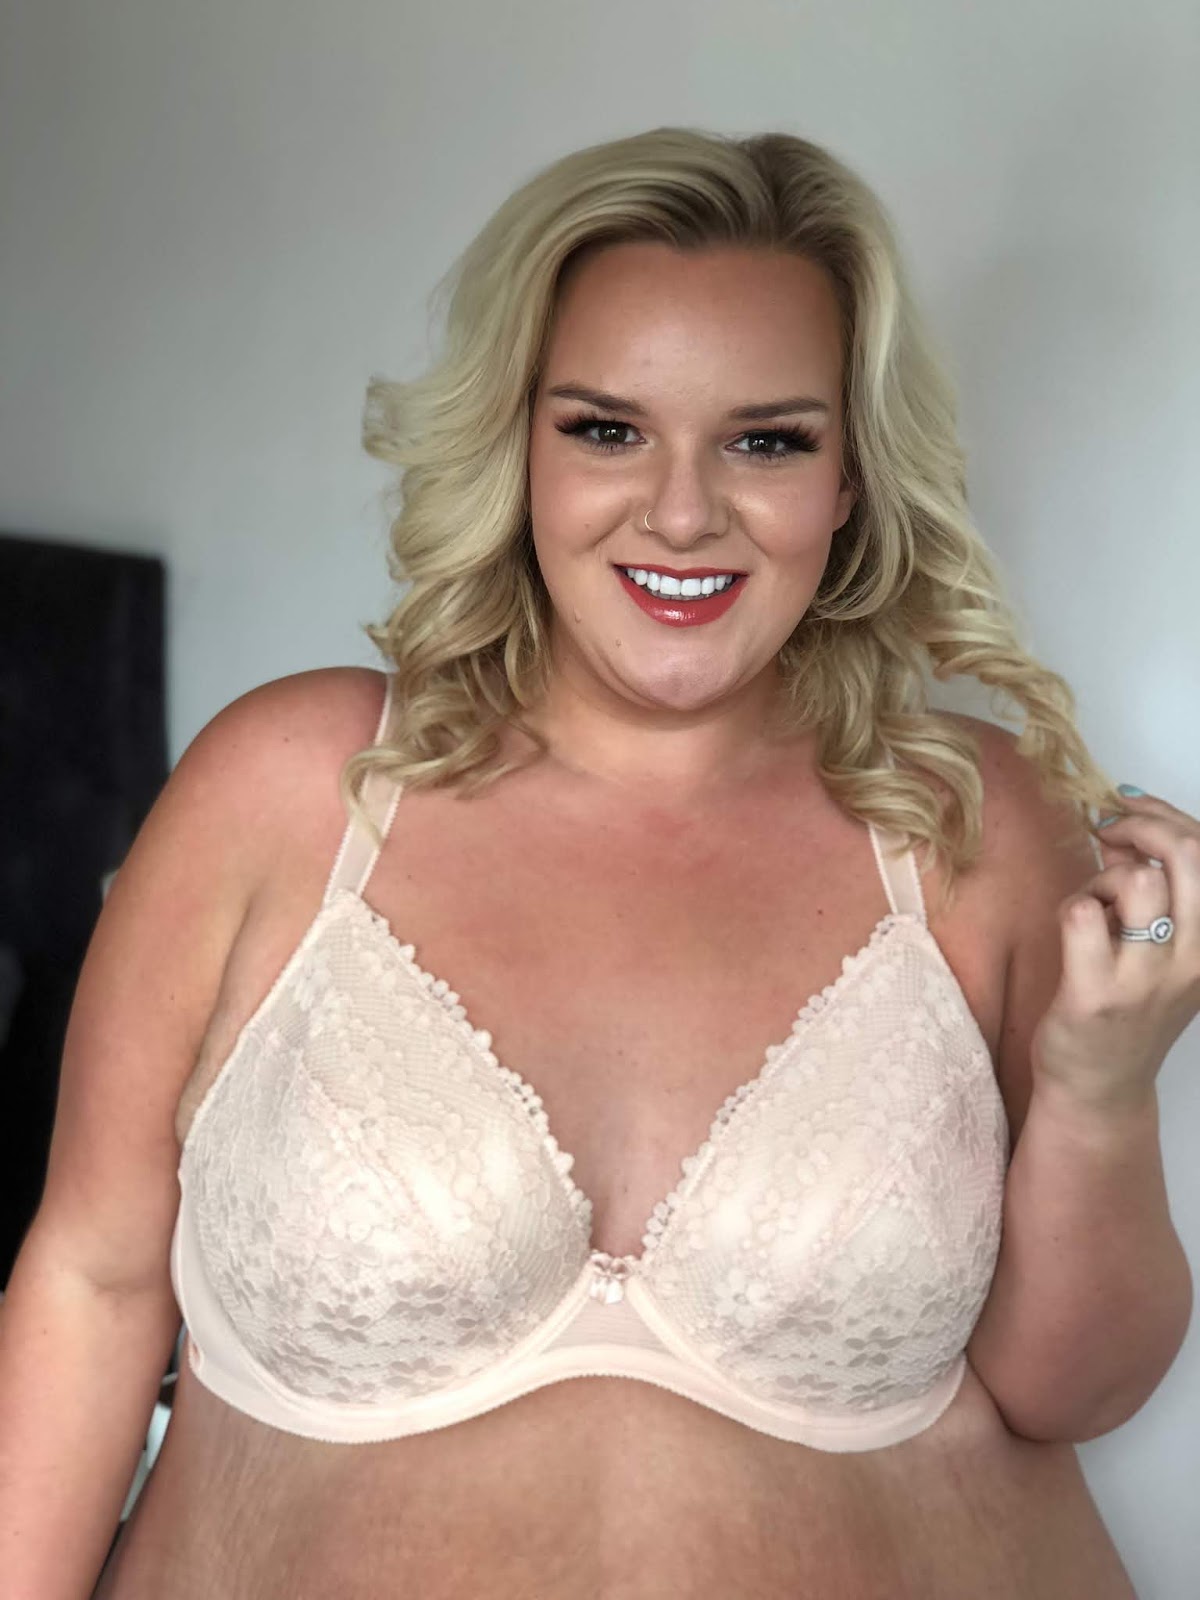 Falling In Love With Lingerie Feat. Simply Be Bargain Daisy Bra on UK Plus Size Blog WhatLauraLoves